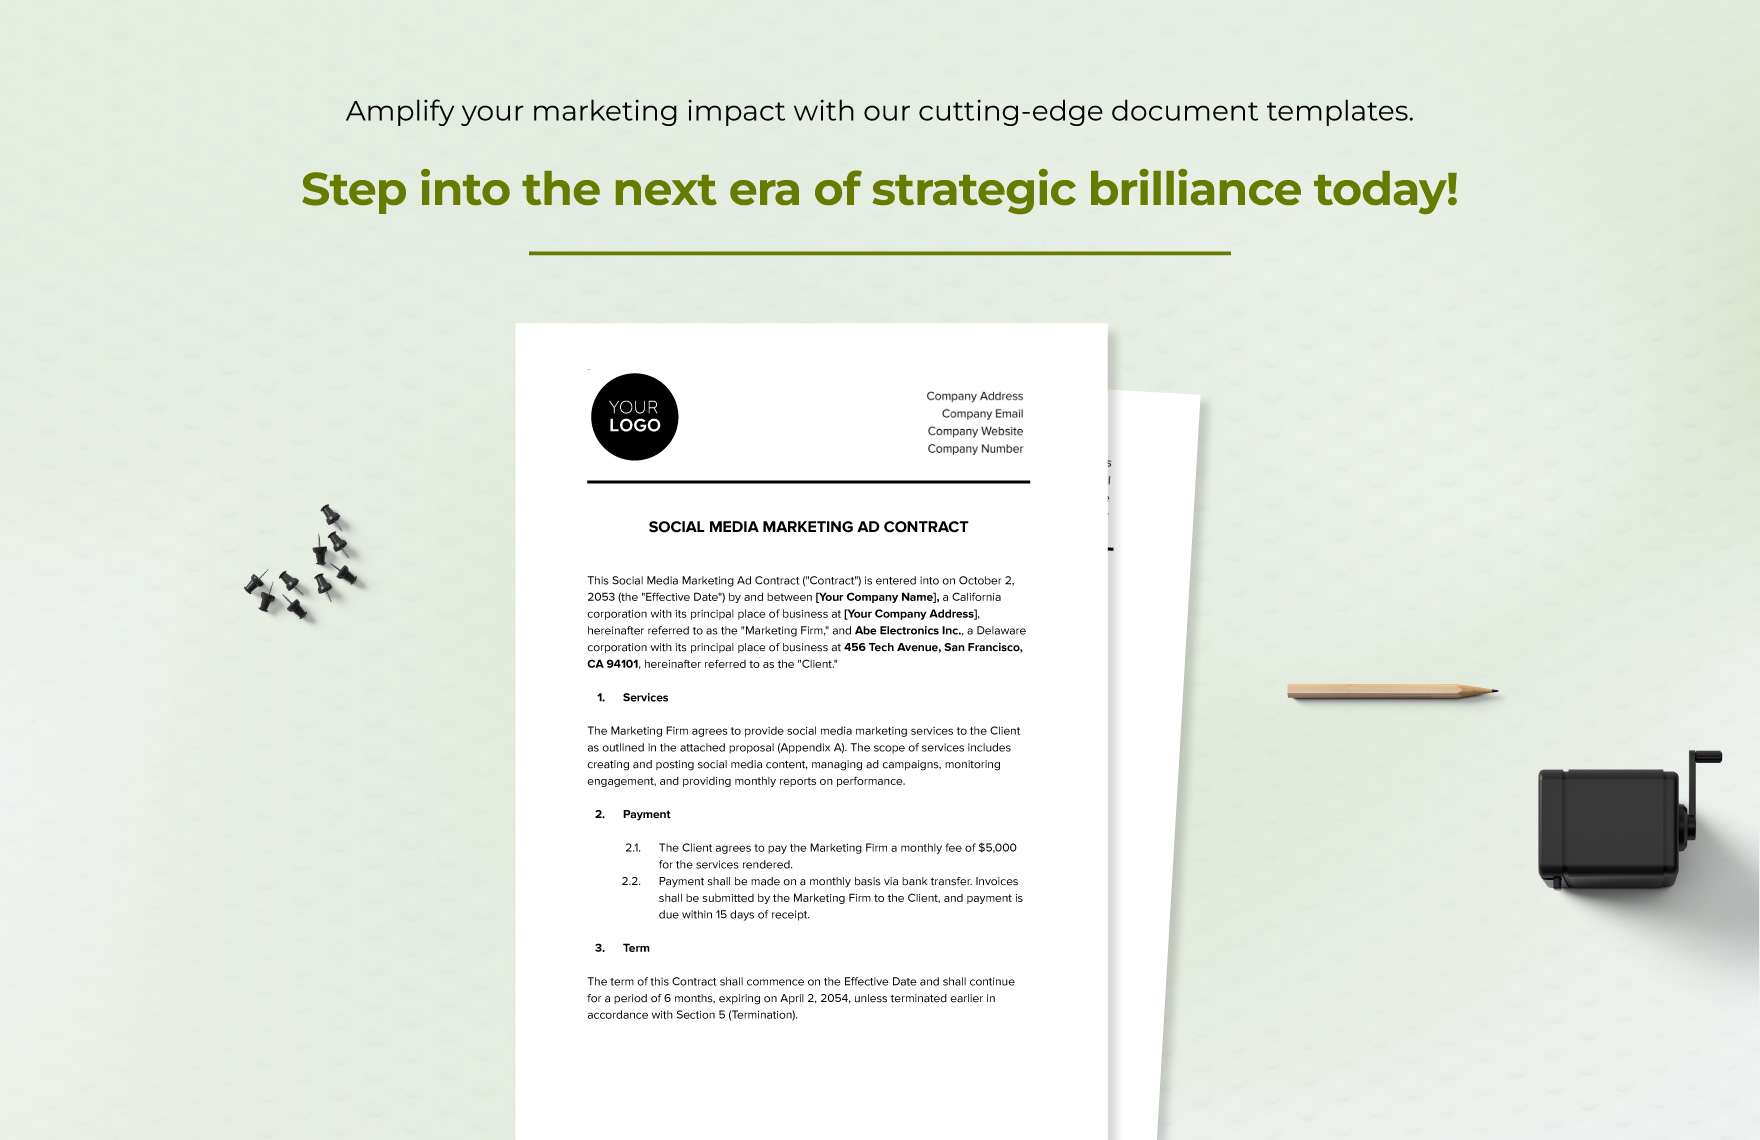 Social Media Marketing Ad Contract Template